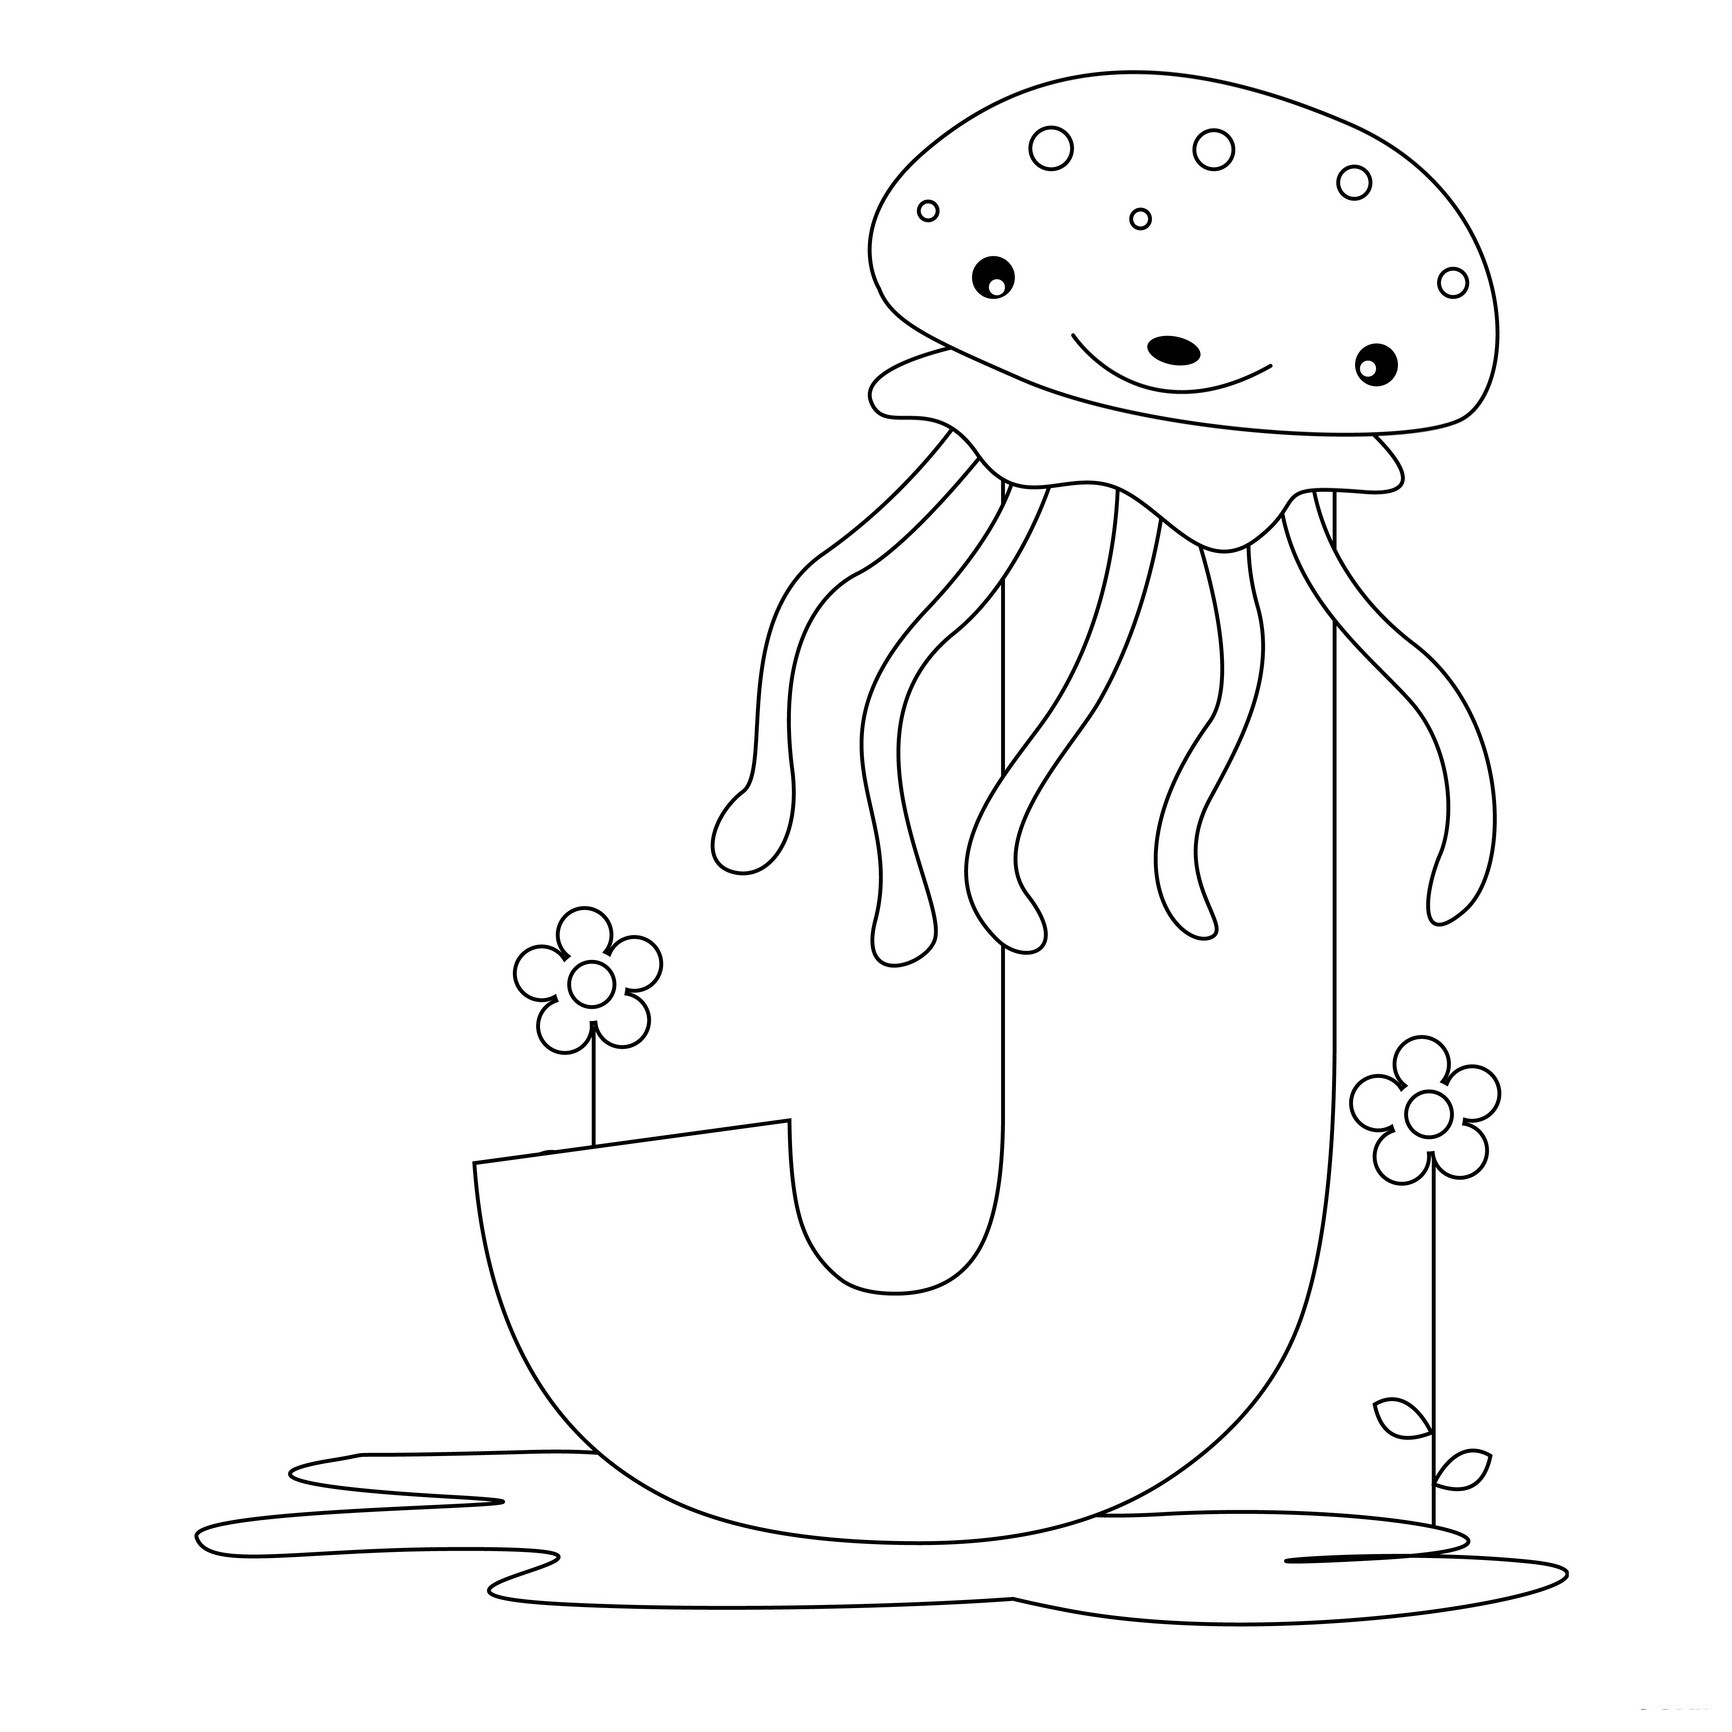 letter j coloring sheet letter j is for jellyfish coloring page free printable sheet coloring j letter 